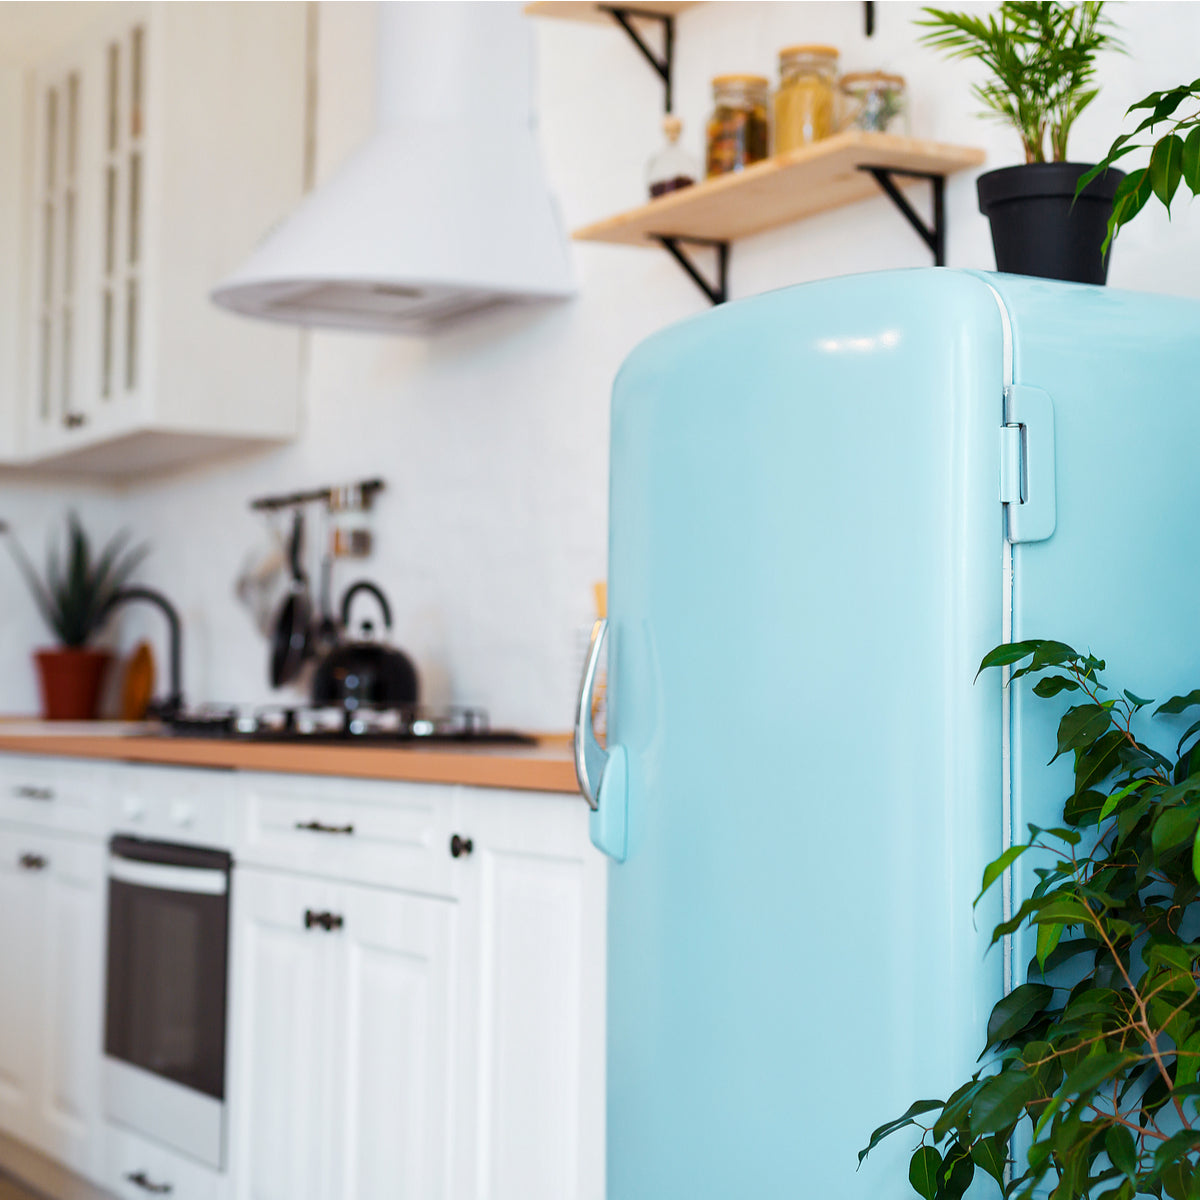 Colorful Appliances are the Hottest Trend in Kitchen Design